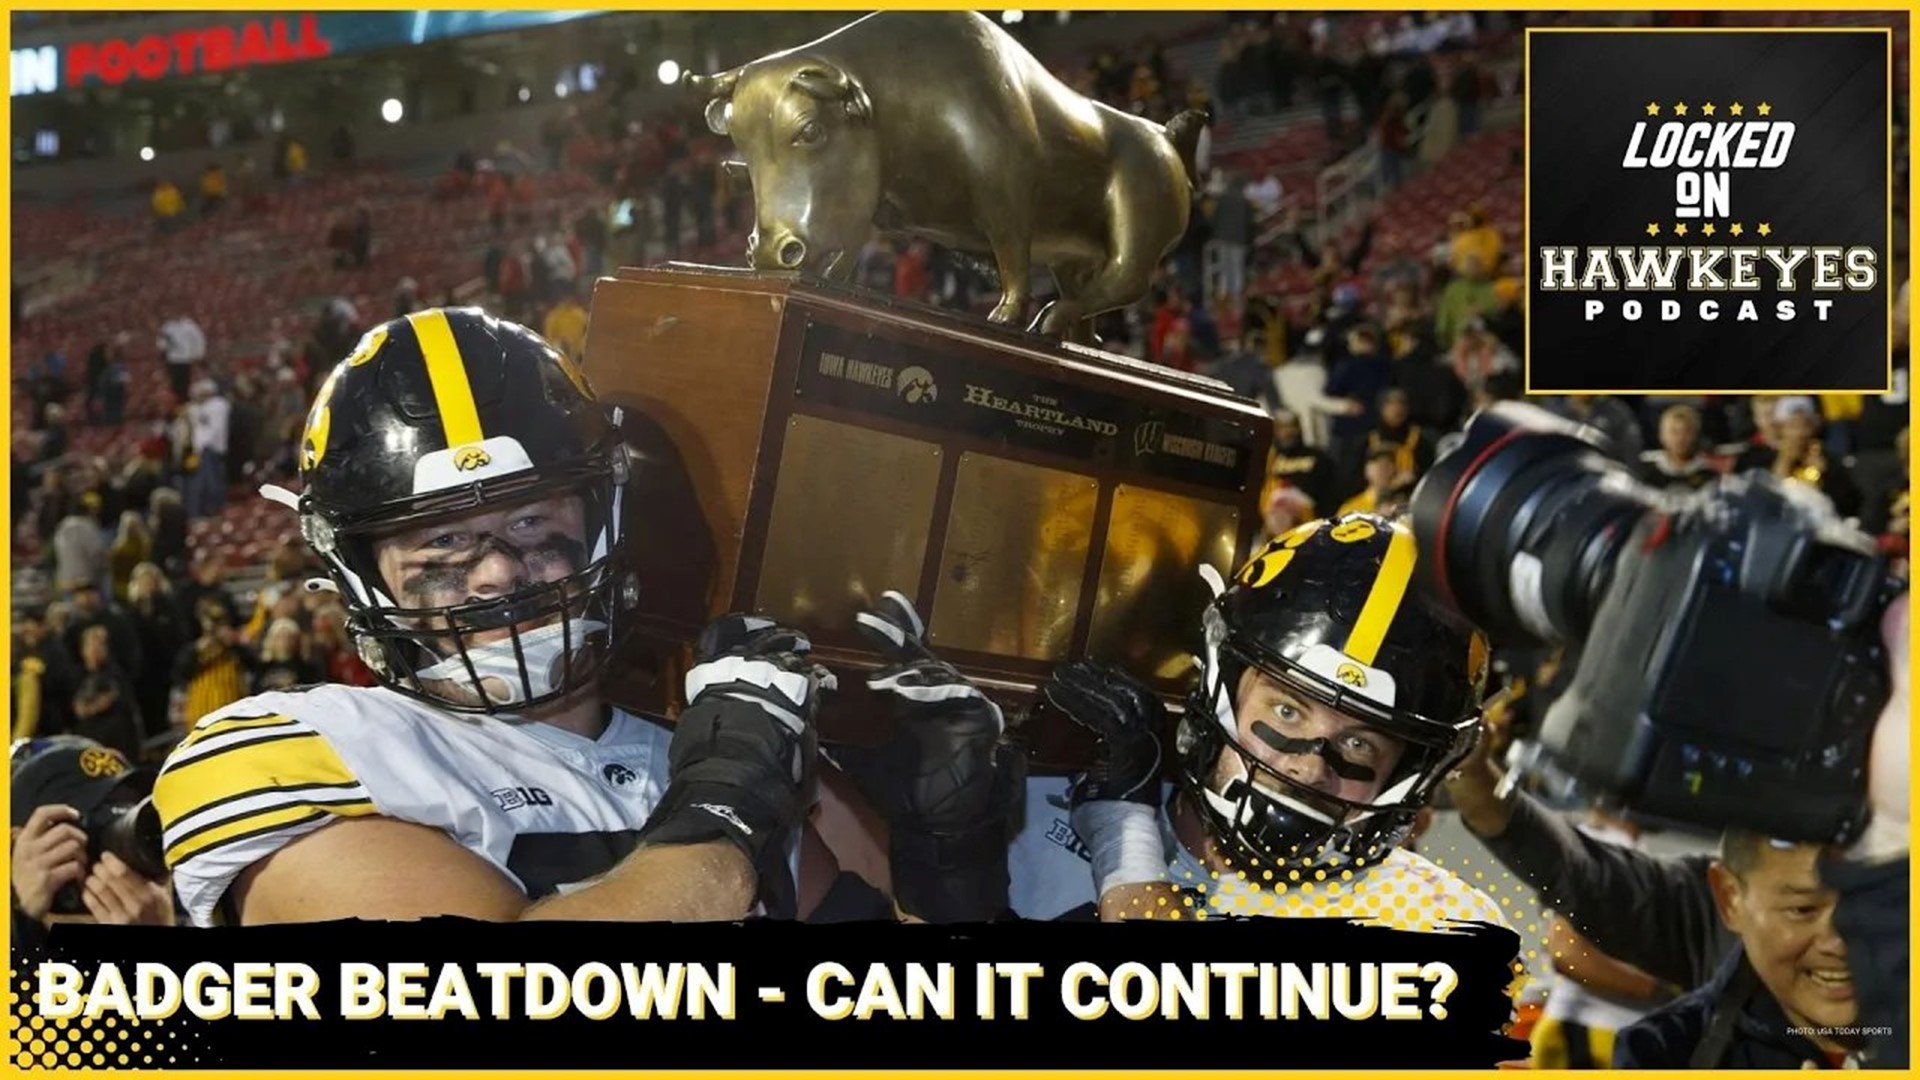 Iowa Football: Badger beatdown, Stat Boy returns & is this sustainable for the Hawkeyes?